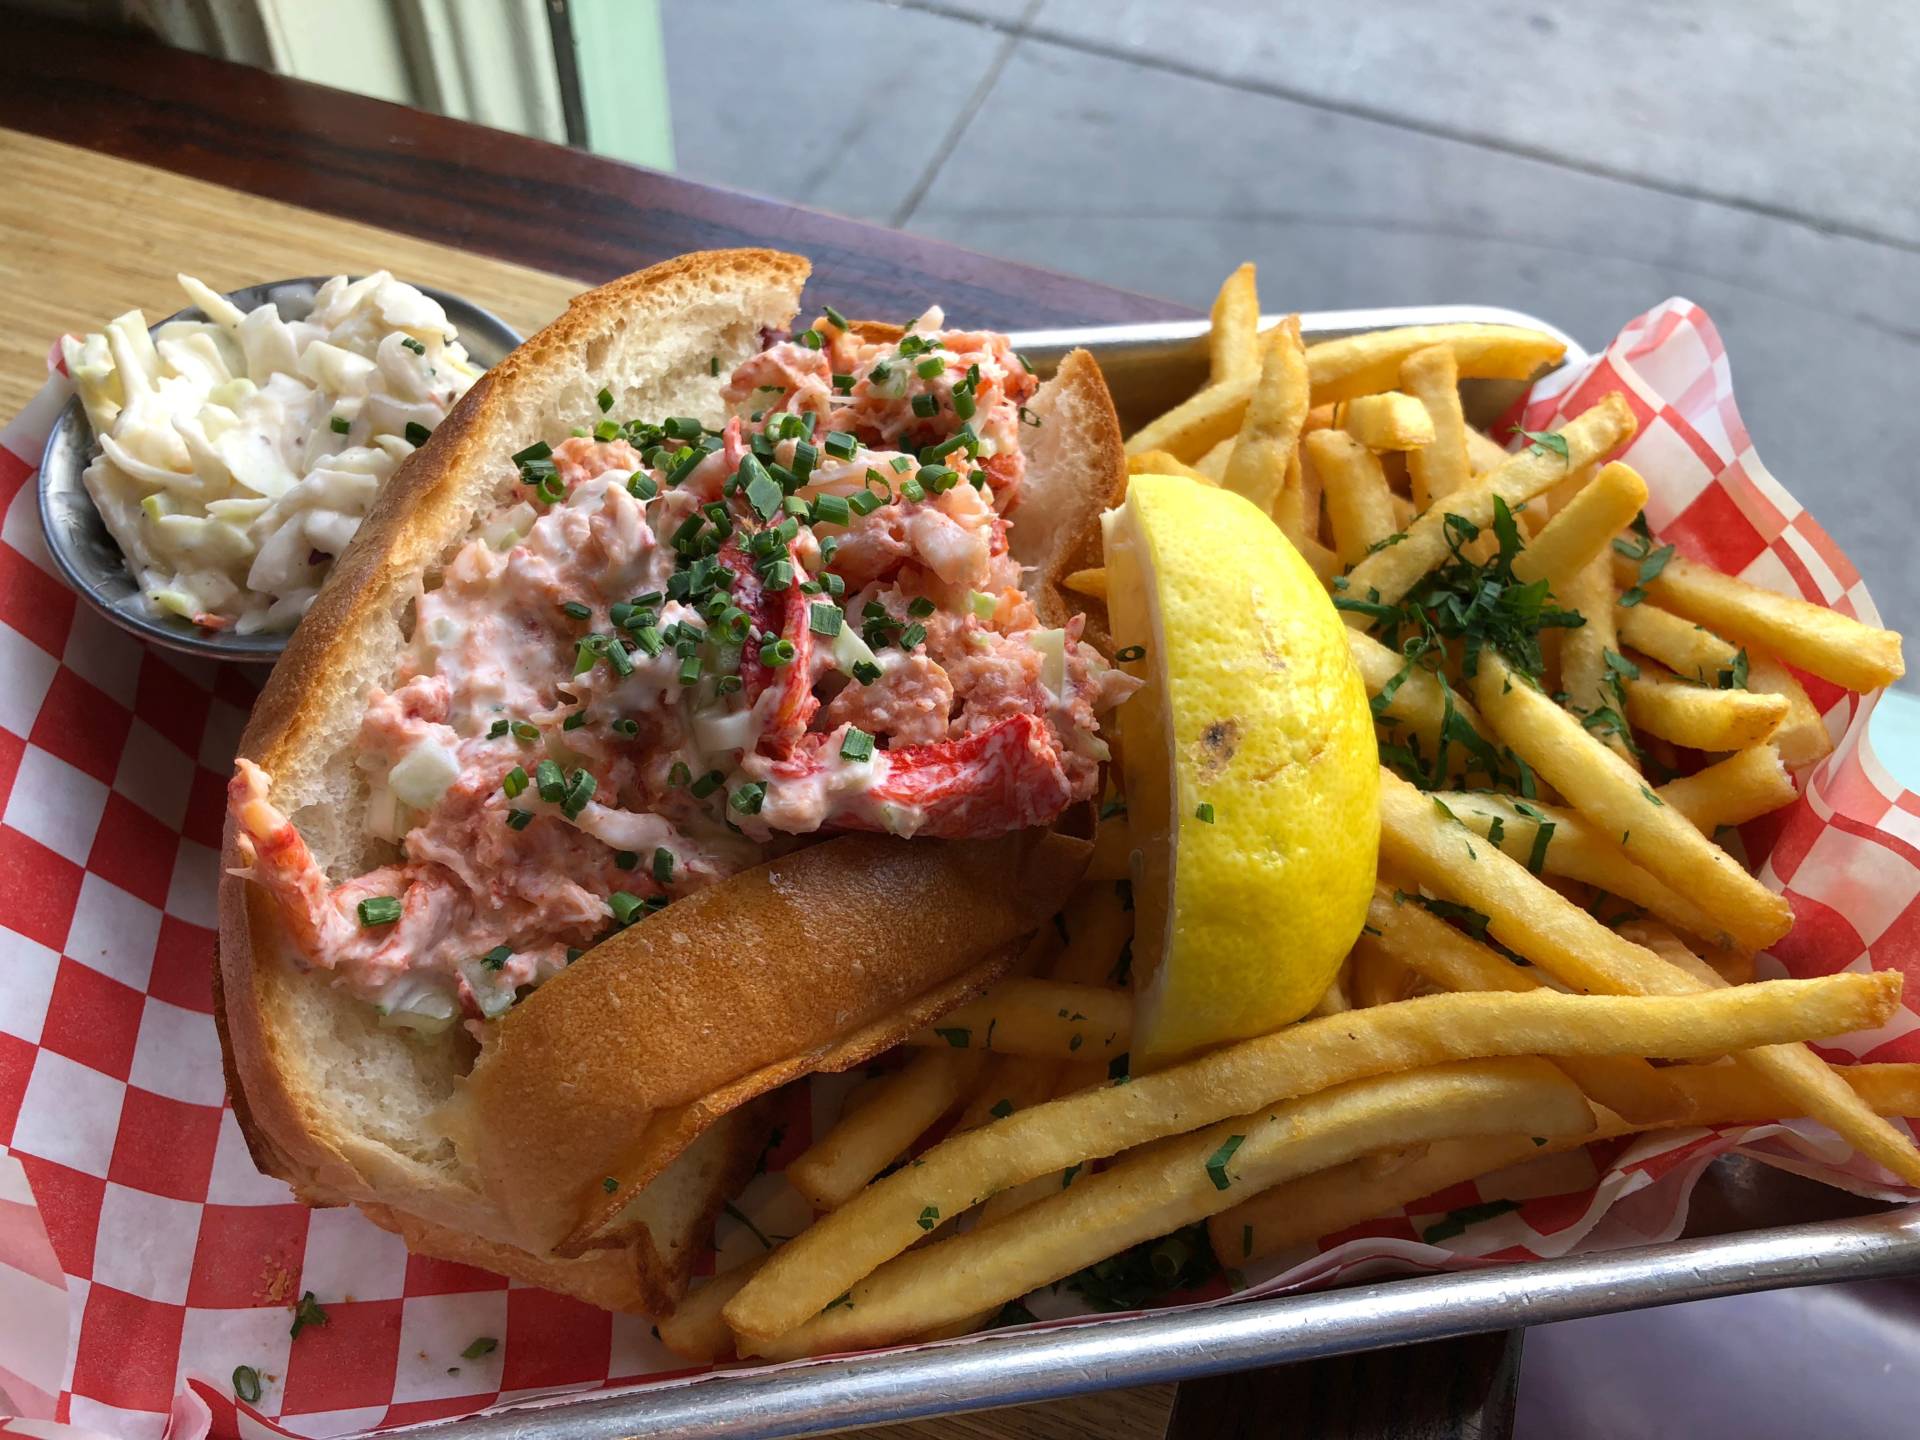 Mayo-based lobster roll at Woodhouse Fish Co.